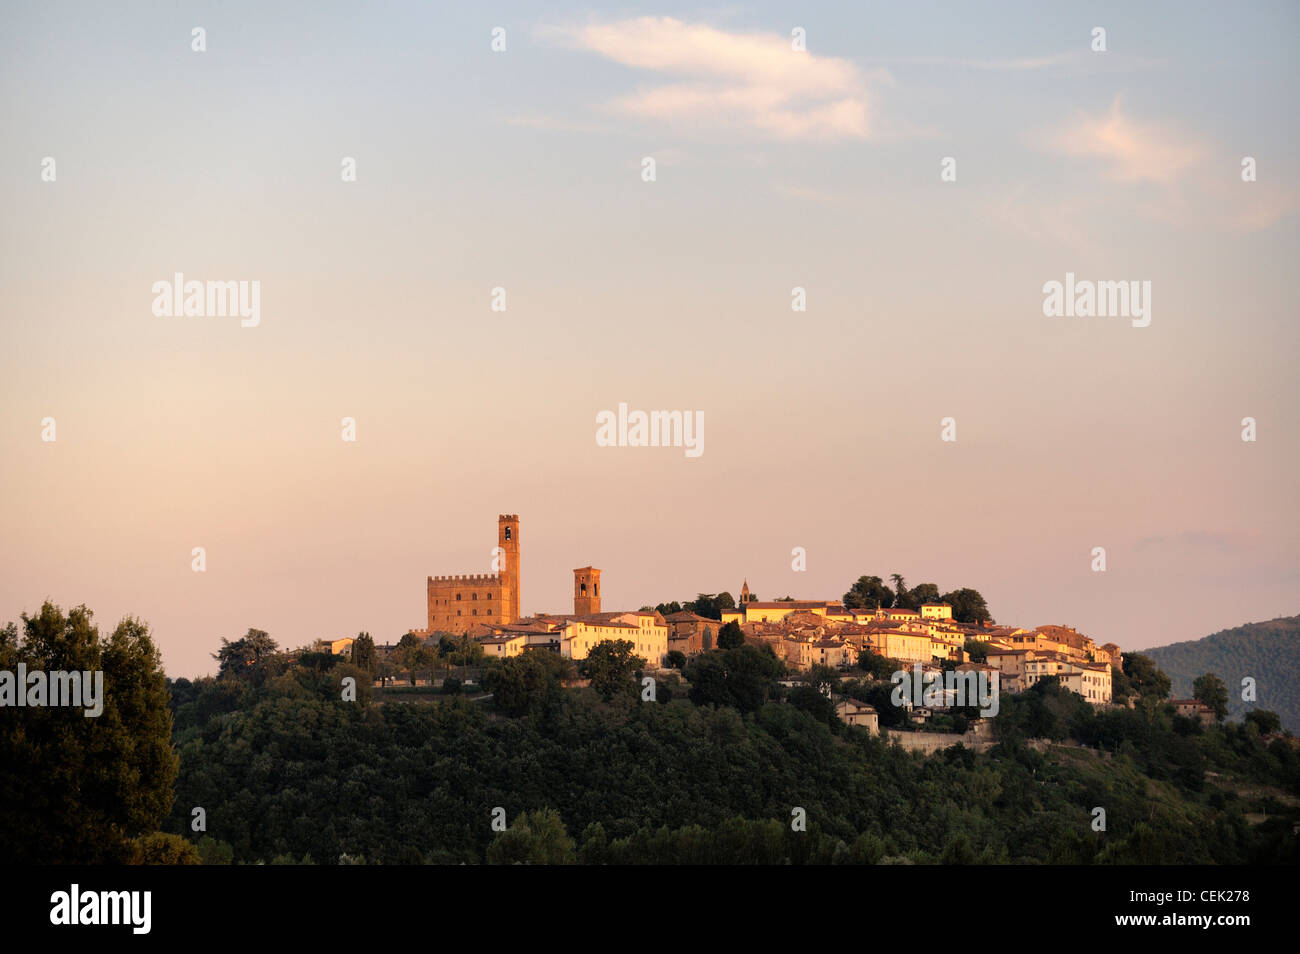 The mediaeval castle and hill town of Poppi, Tuscany, Italy. Summer evening Stock Photo